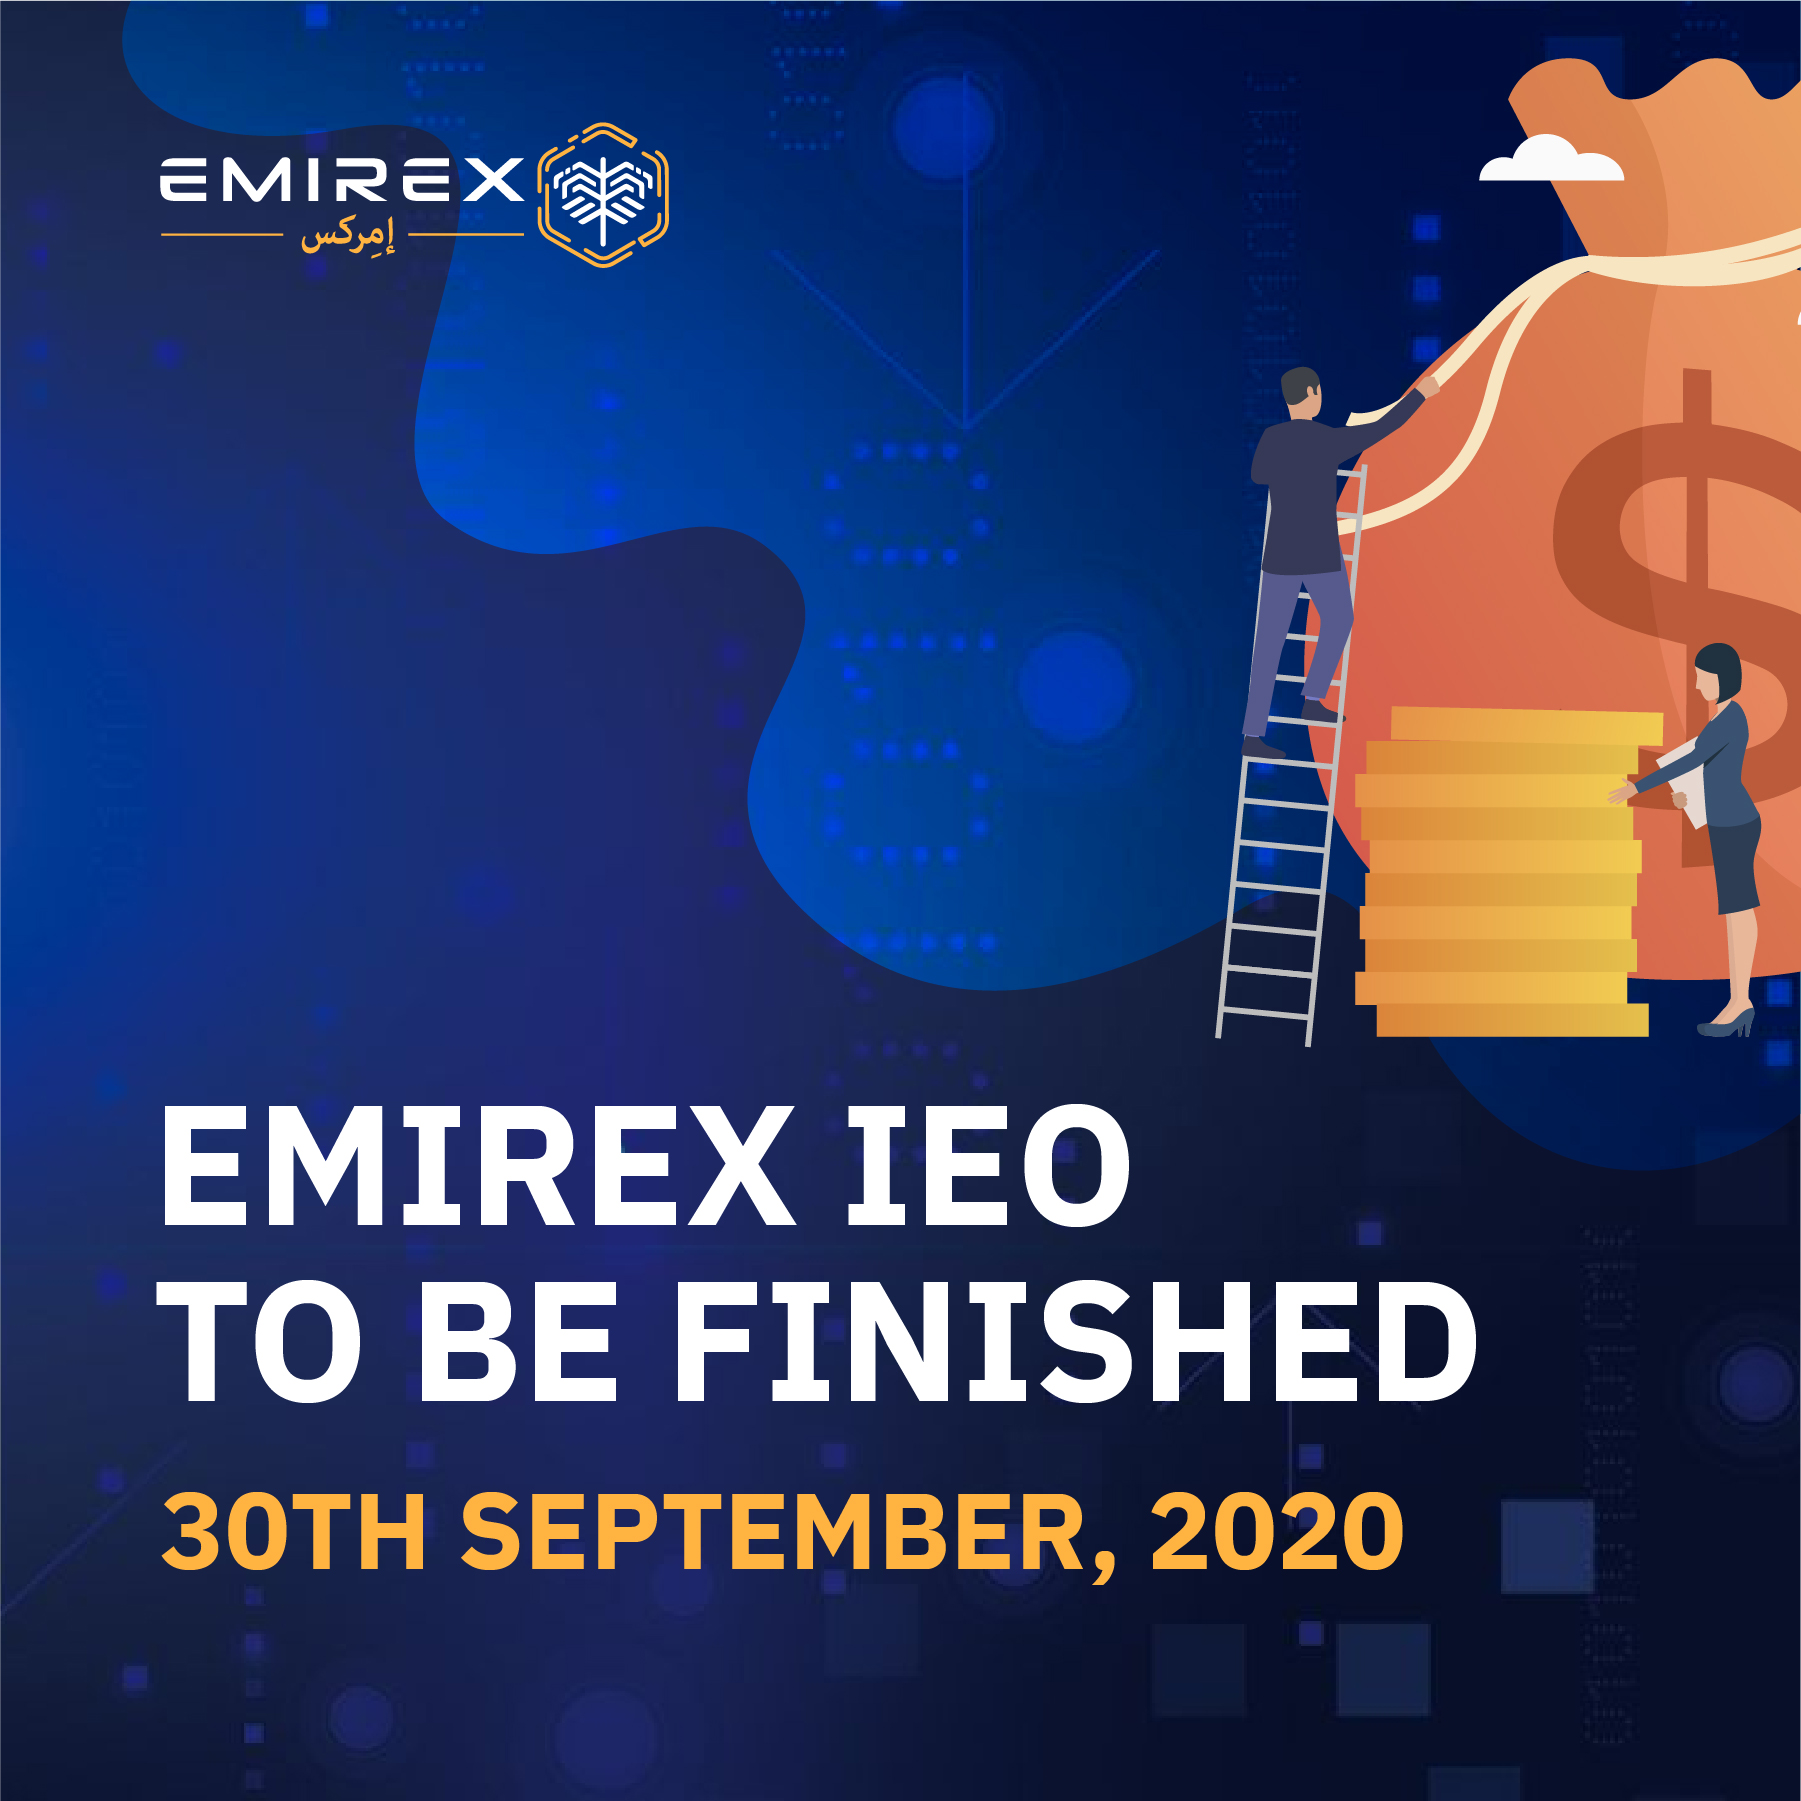 Our Services | Emirex Advisory